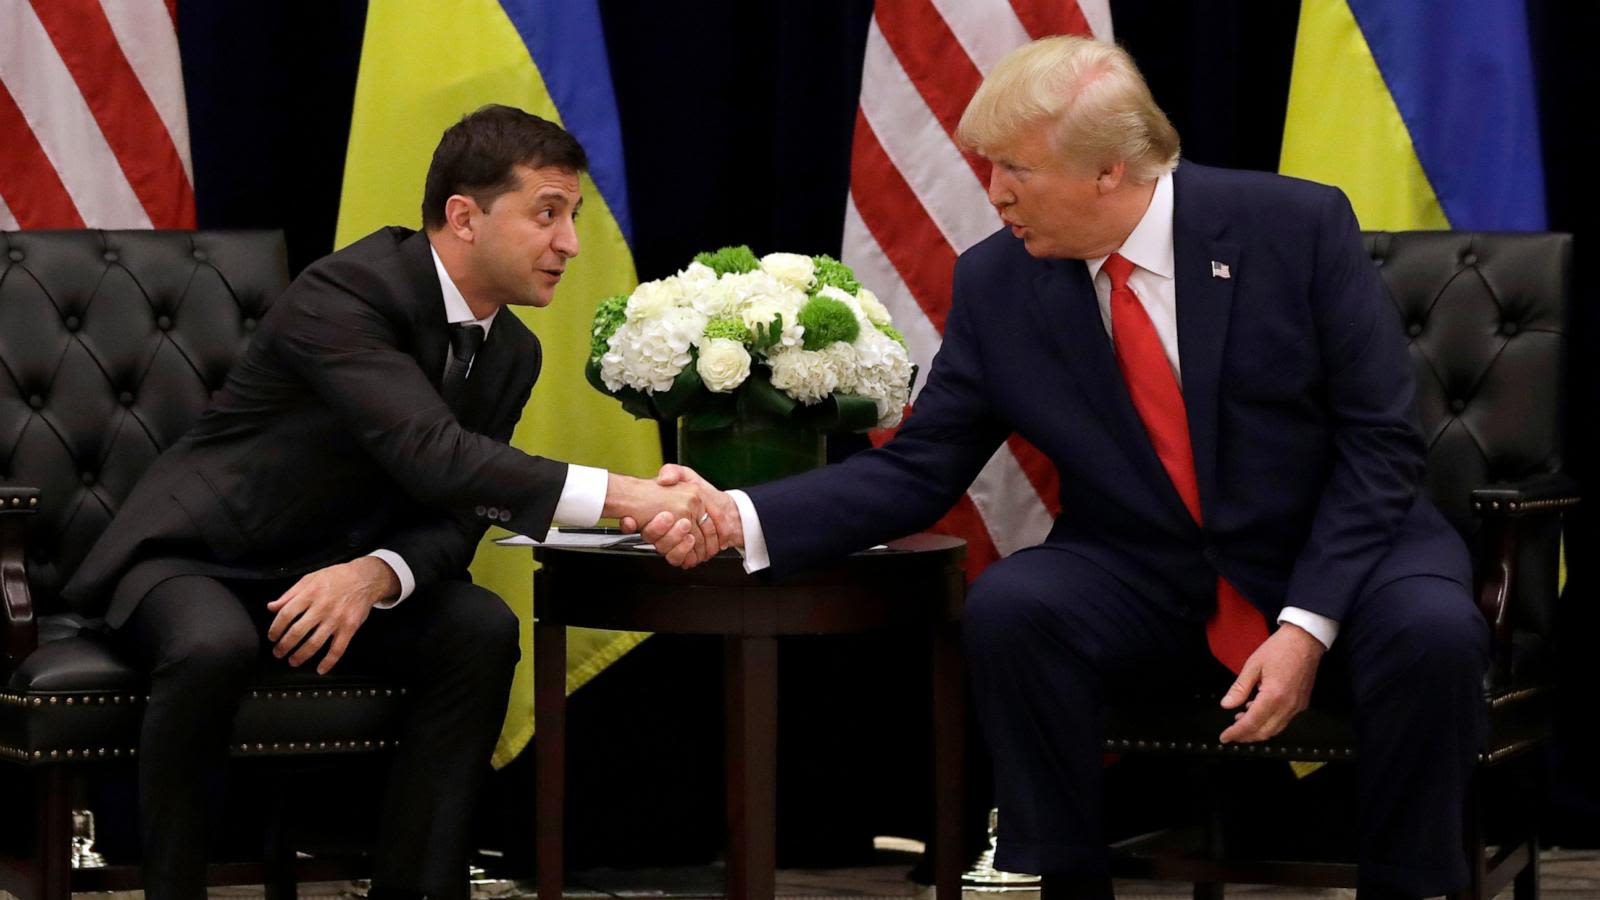 Trump says he had a 'very good phone call' with Zelenskyy